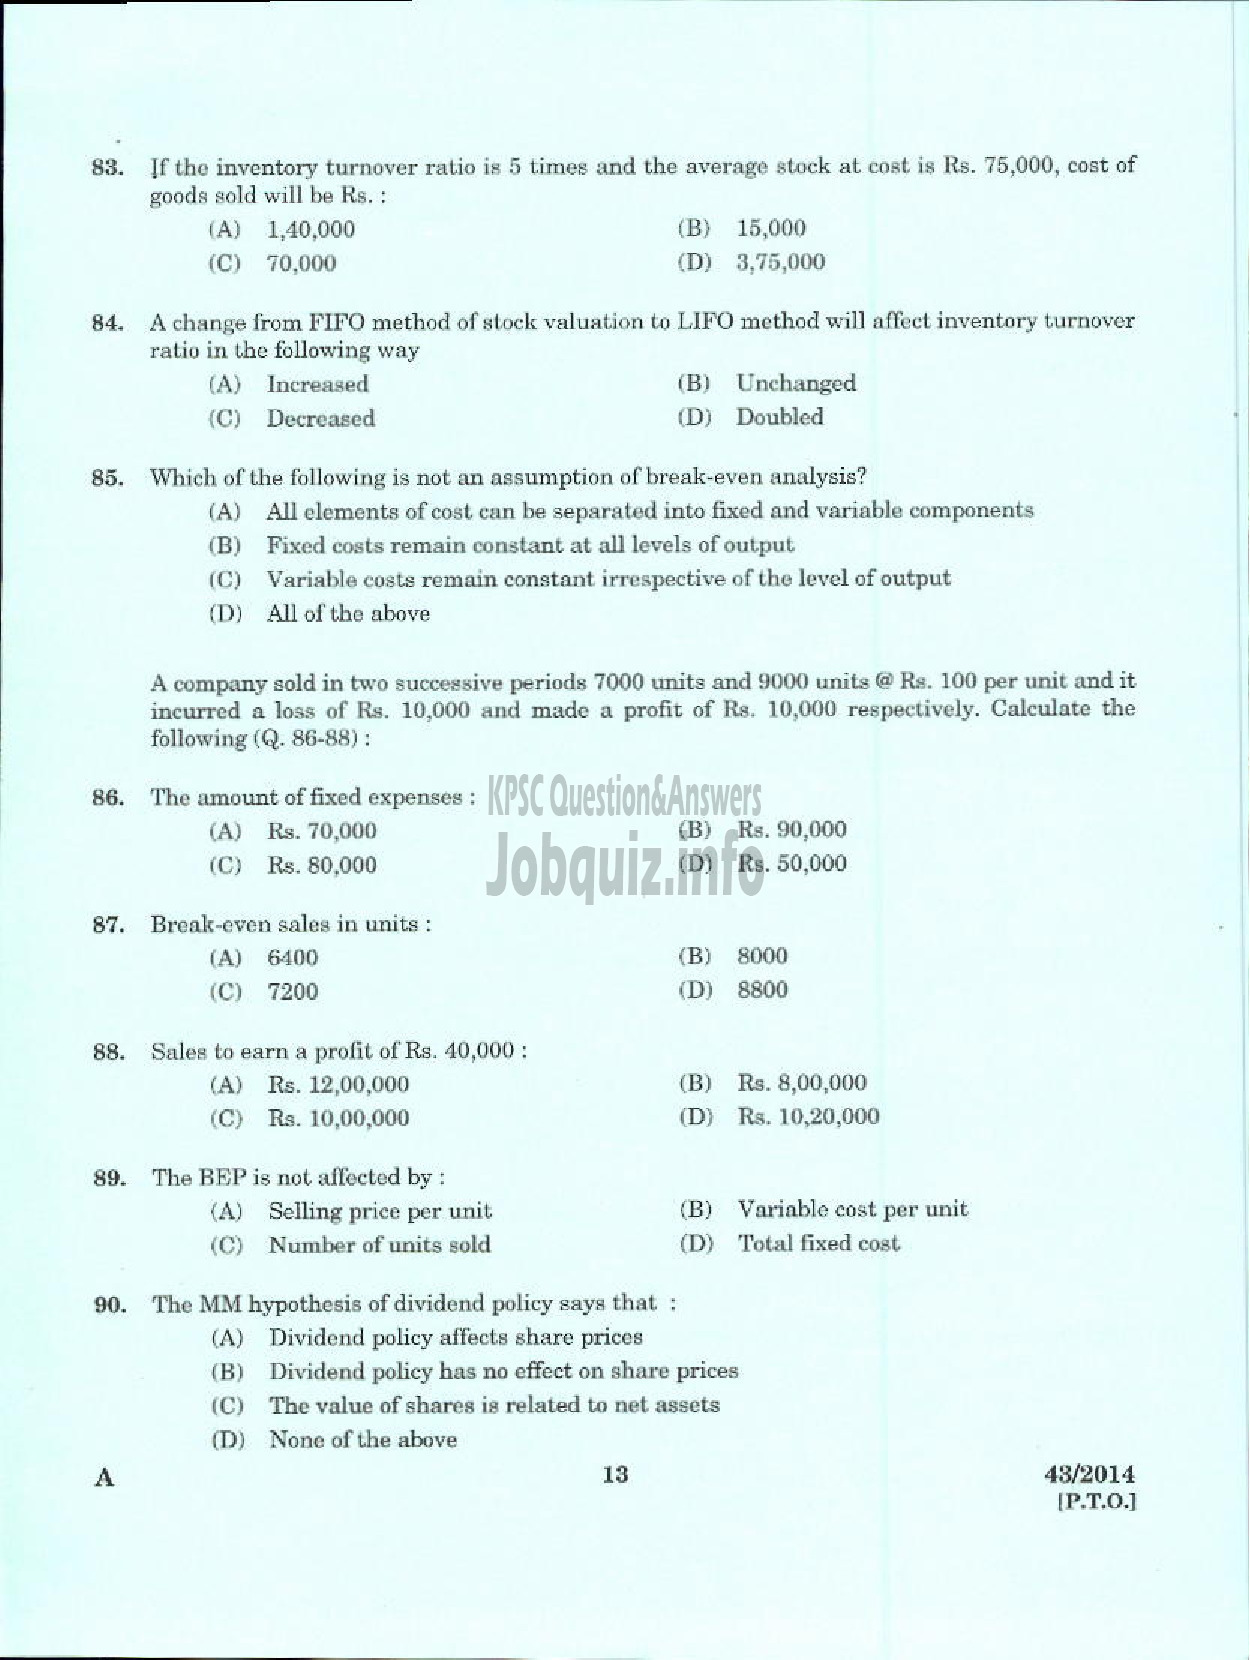 Kerala PSC Question Paper - DEPUTY GENERAL MANAGER DCB IDKY AND KSGD PART I AND PART II-11